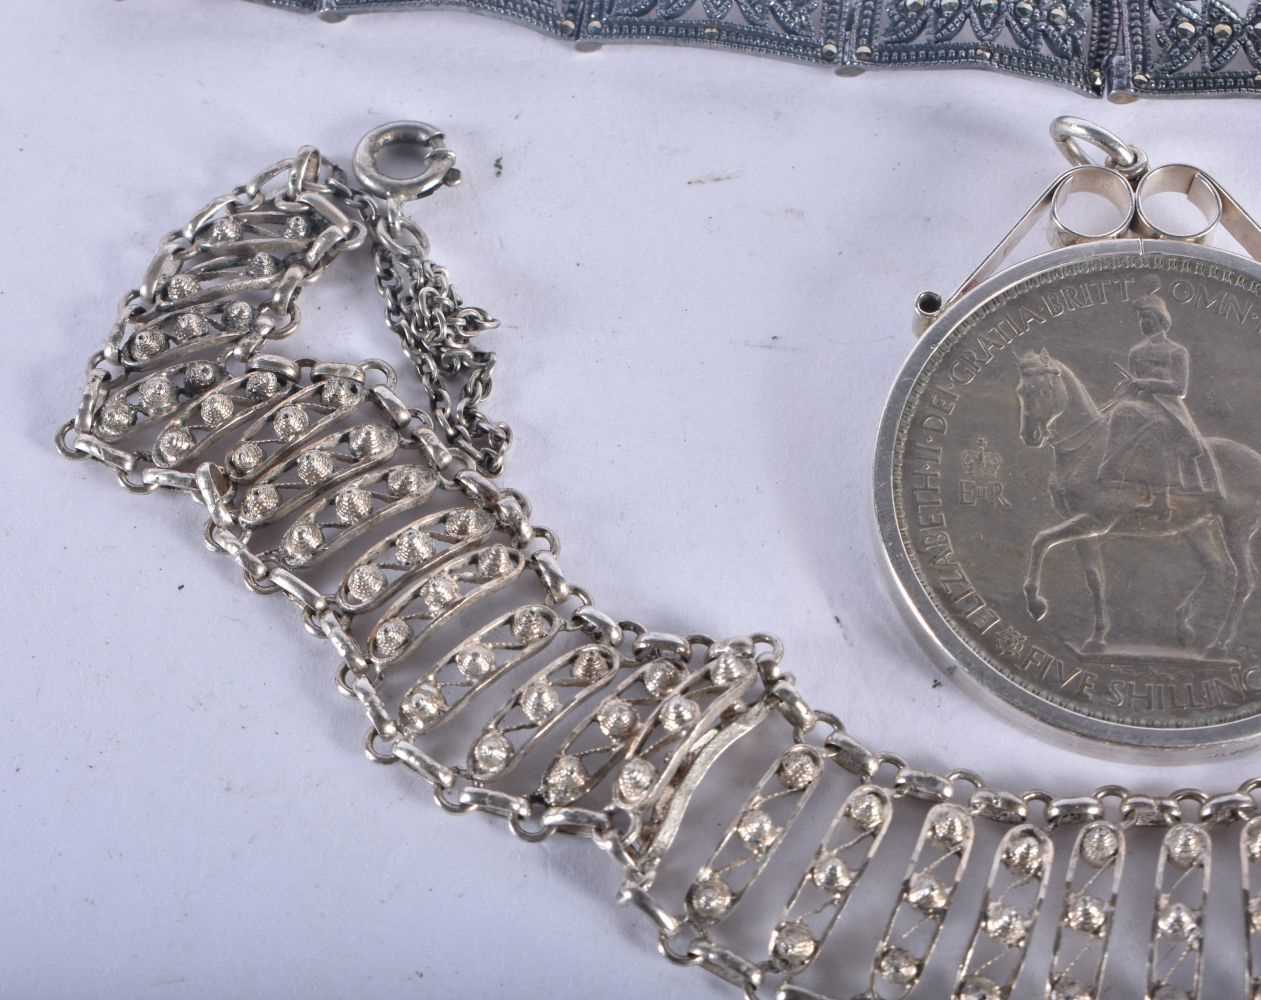 Seven items of Silver Jewellery including a Bracelet, 3 Pendant Necklaces, a Chain, a Silver Mounted - Image 4 of 5